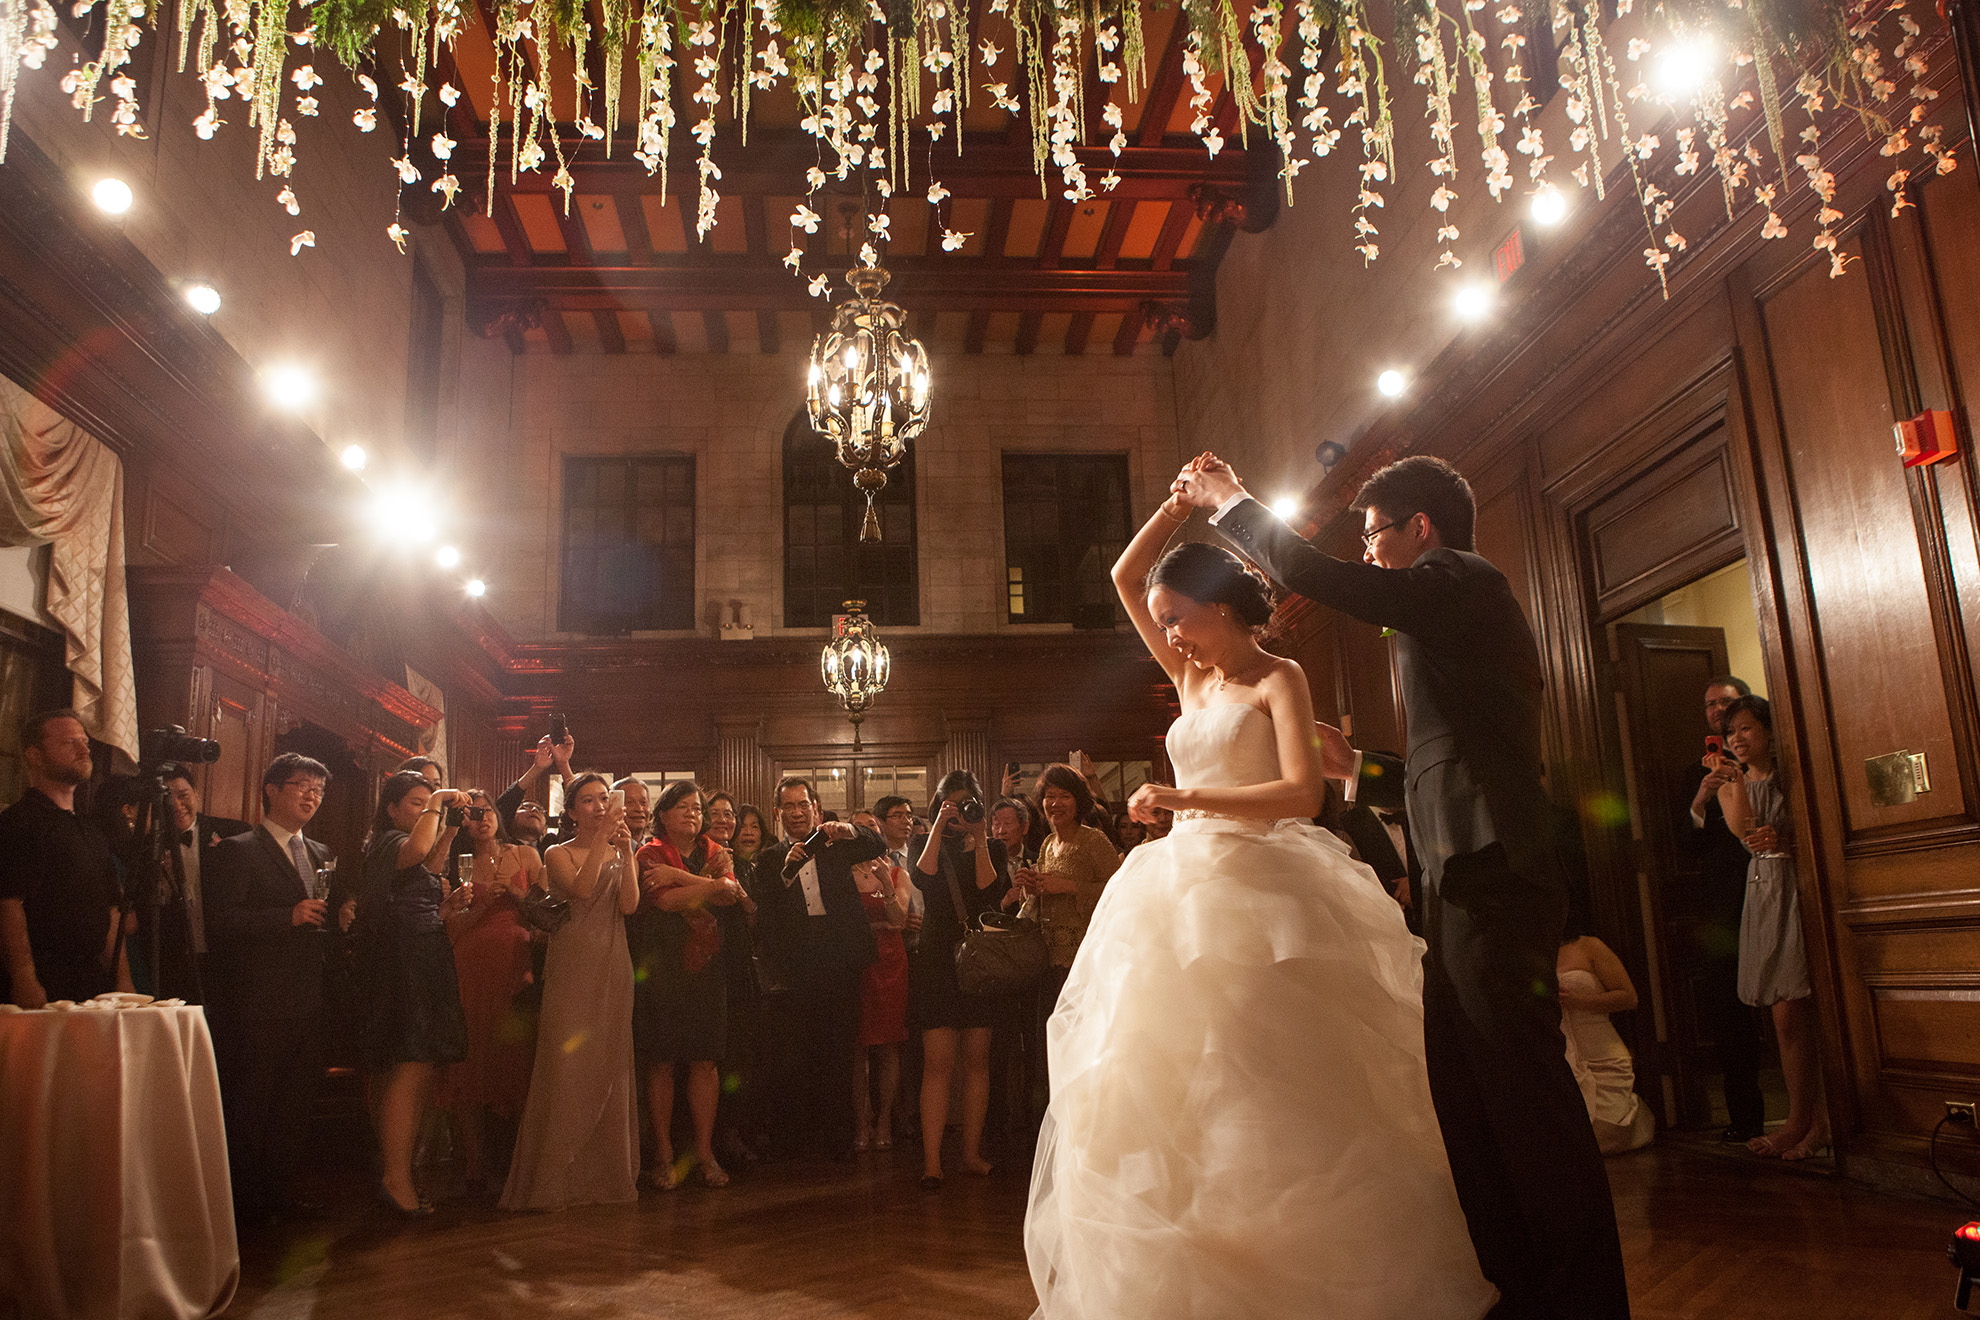 Wedding Dance in the charming Mansion